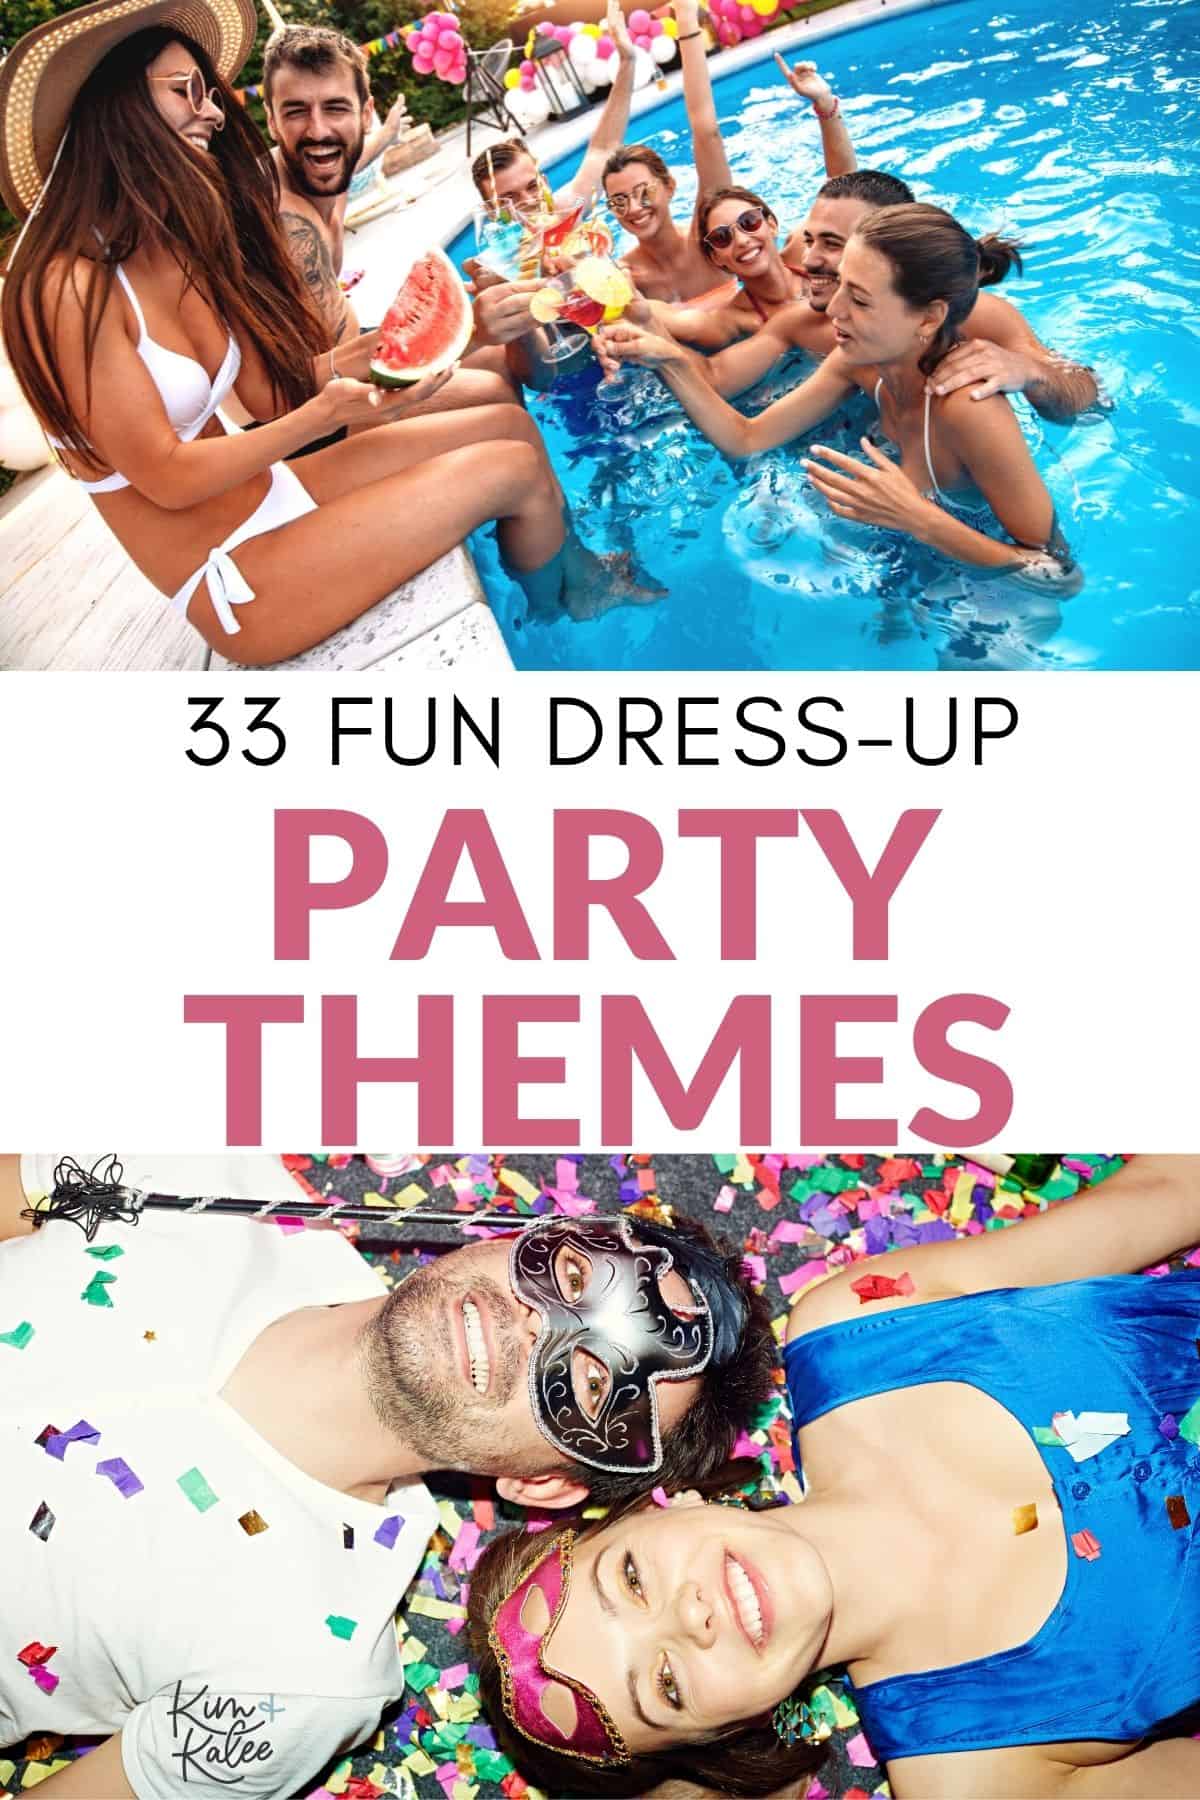 Collage of a mardi gras party and pool party - text overlay "33 Fun Dress Up Party Themes for Adults"